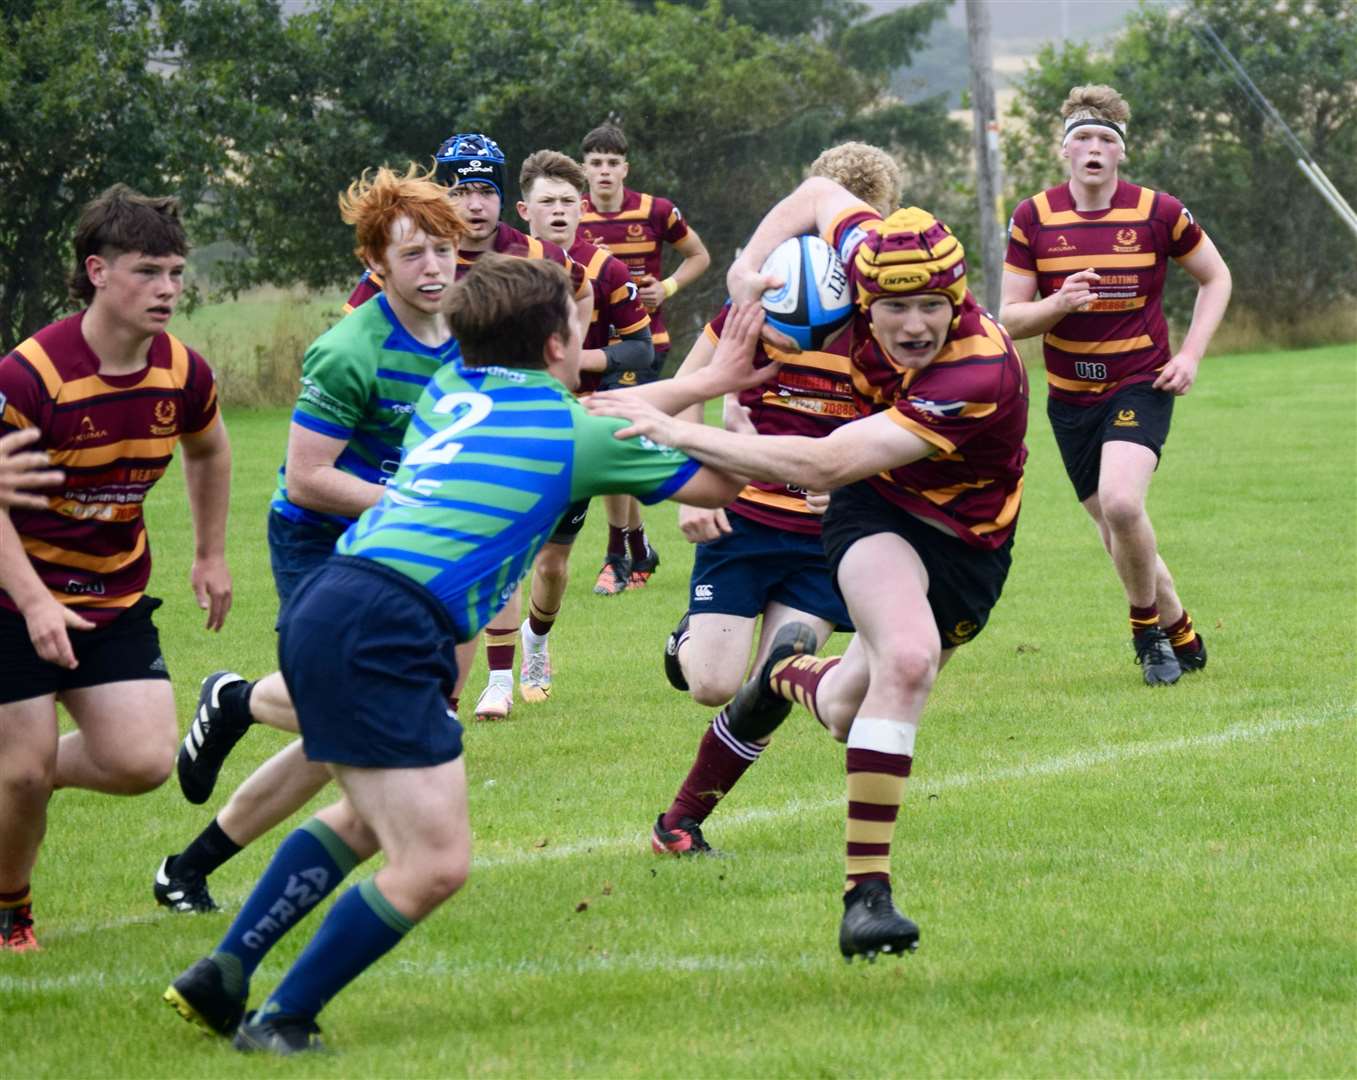 Ellon Rugby Club will mark the return of its activities with the ROAR festival.